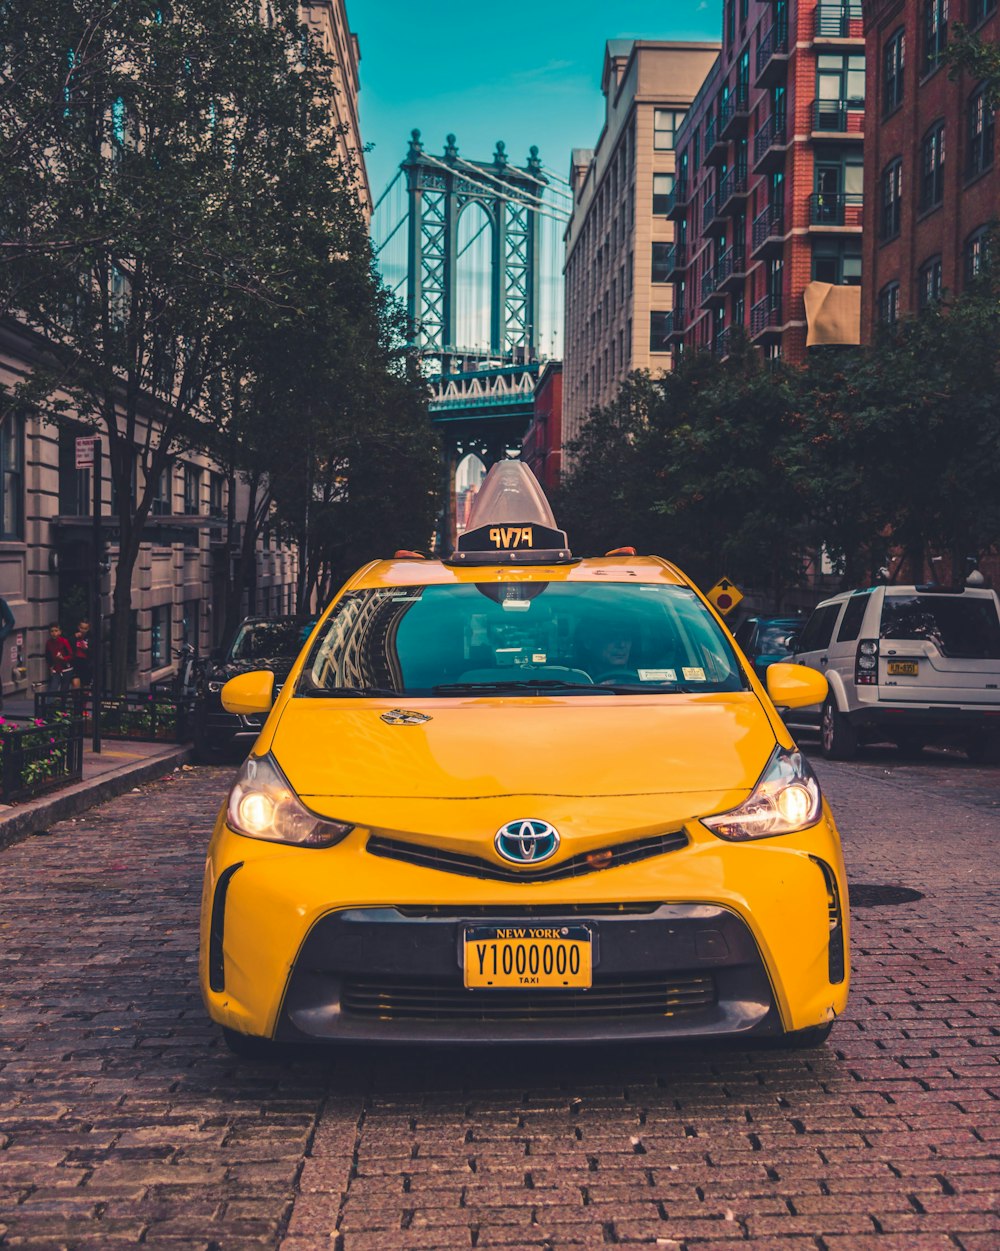 yellow Toyota taxi cab parked near building